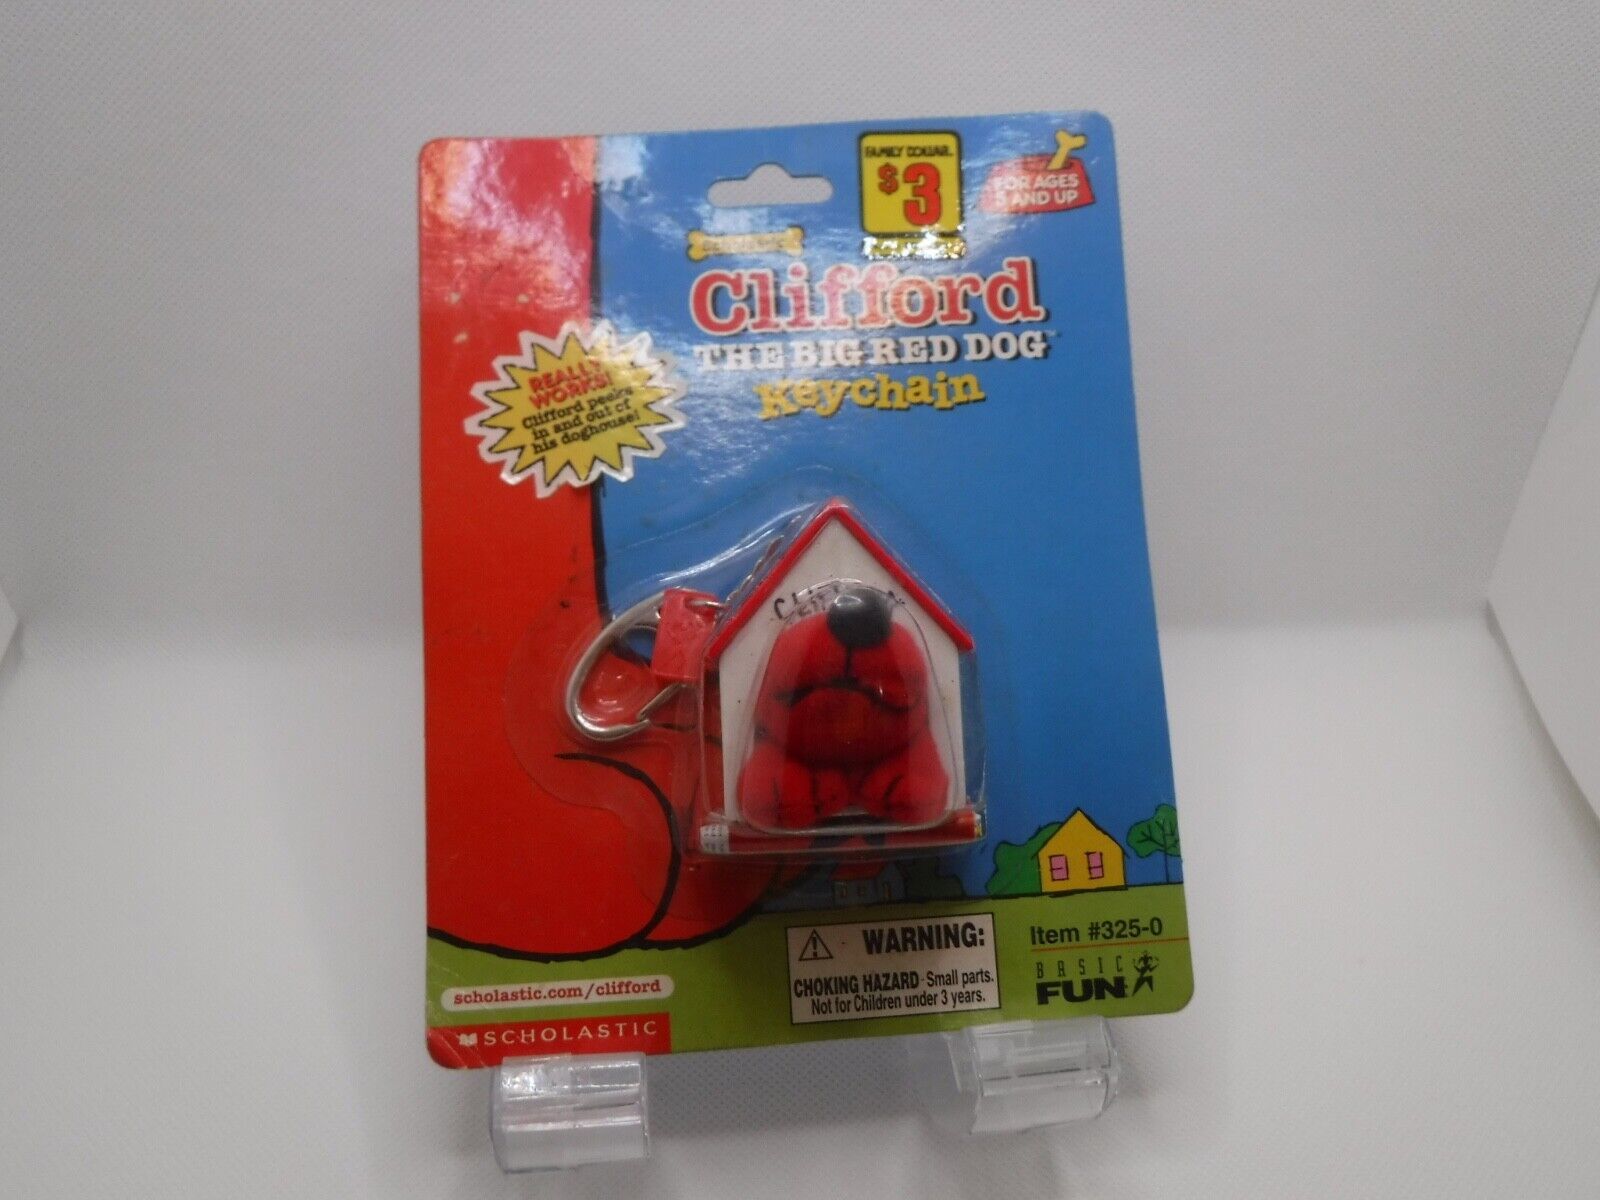 Clifford Key Chain - New | Big Red Dog | Doghouse | Scholastic 2001 | NOS - $34.98